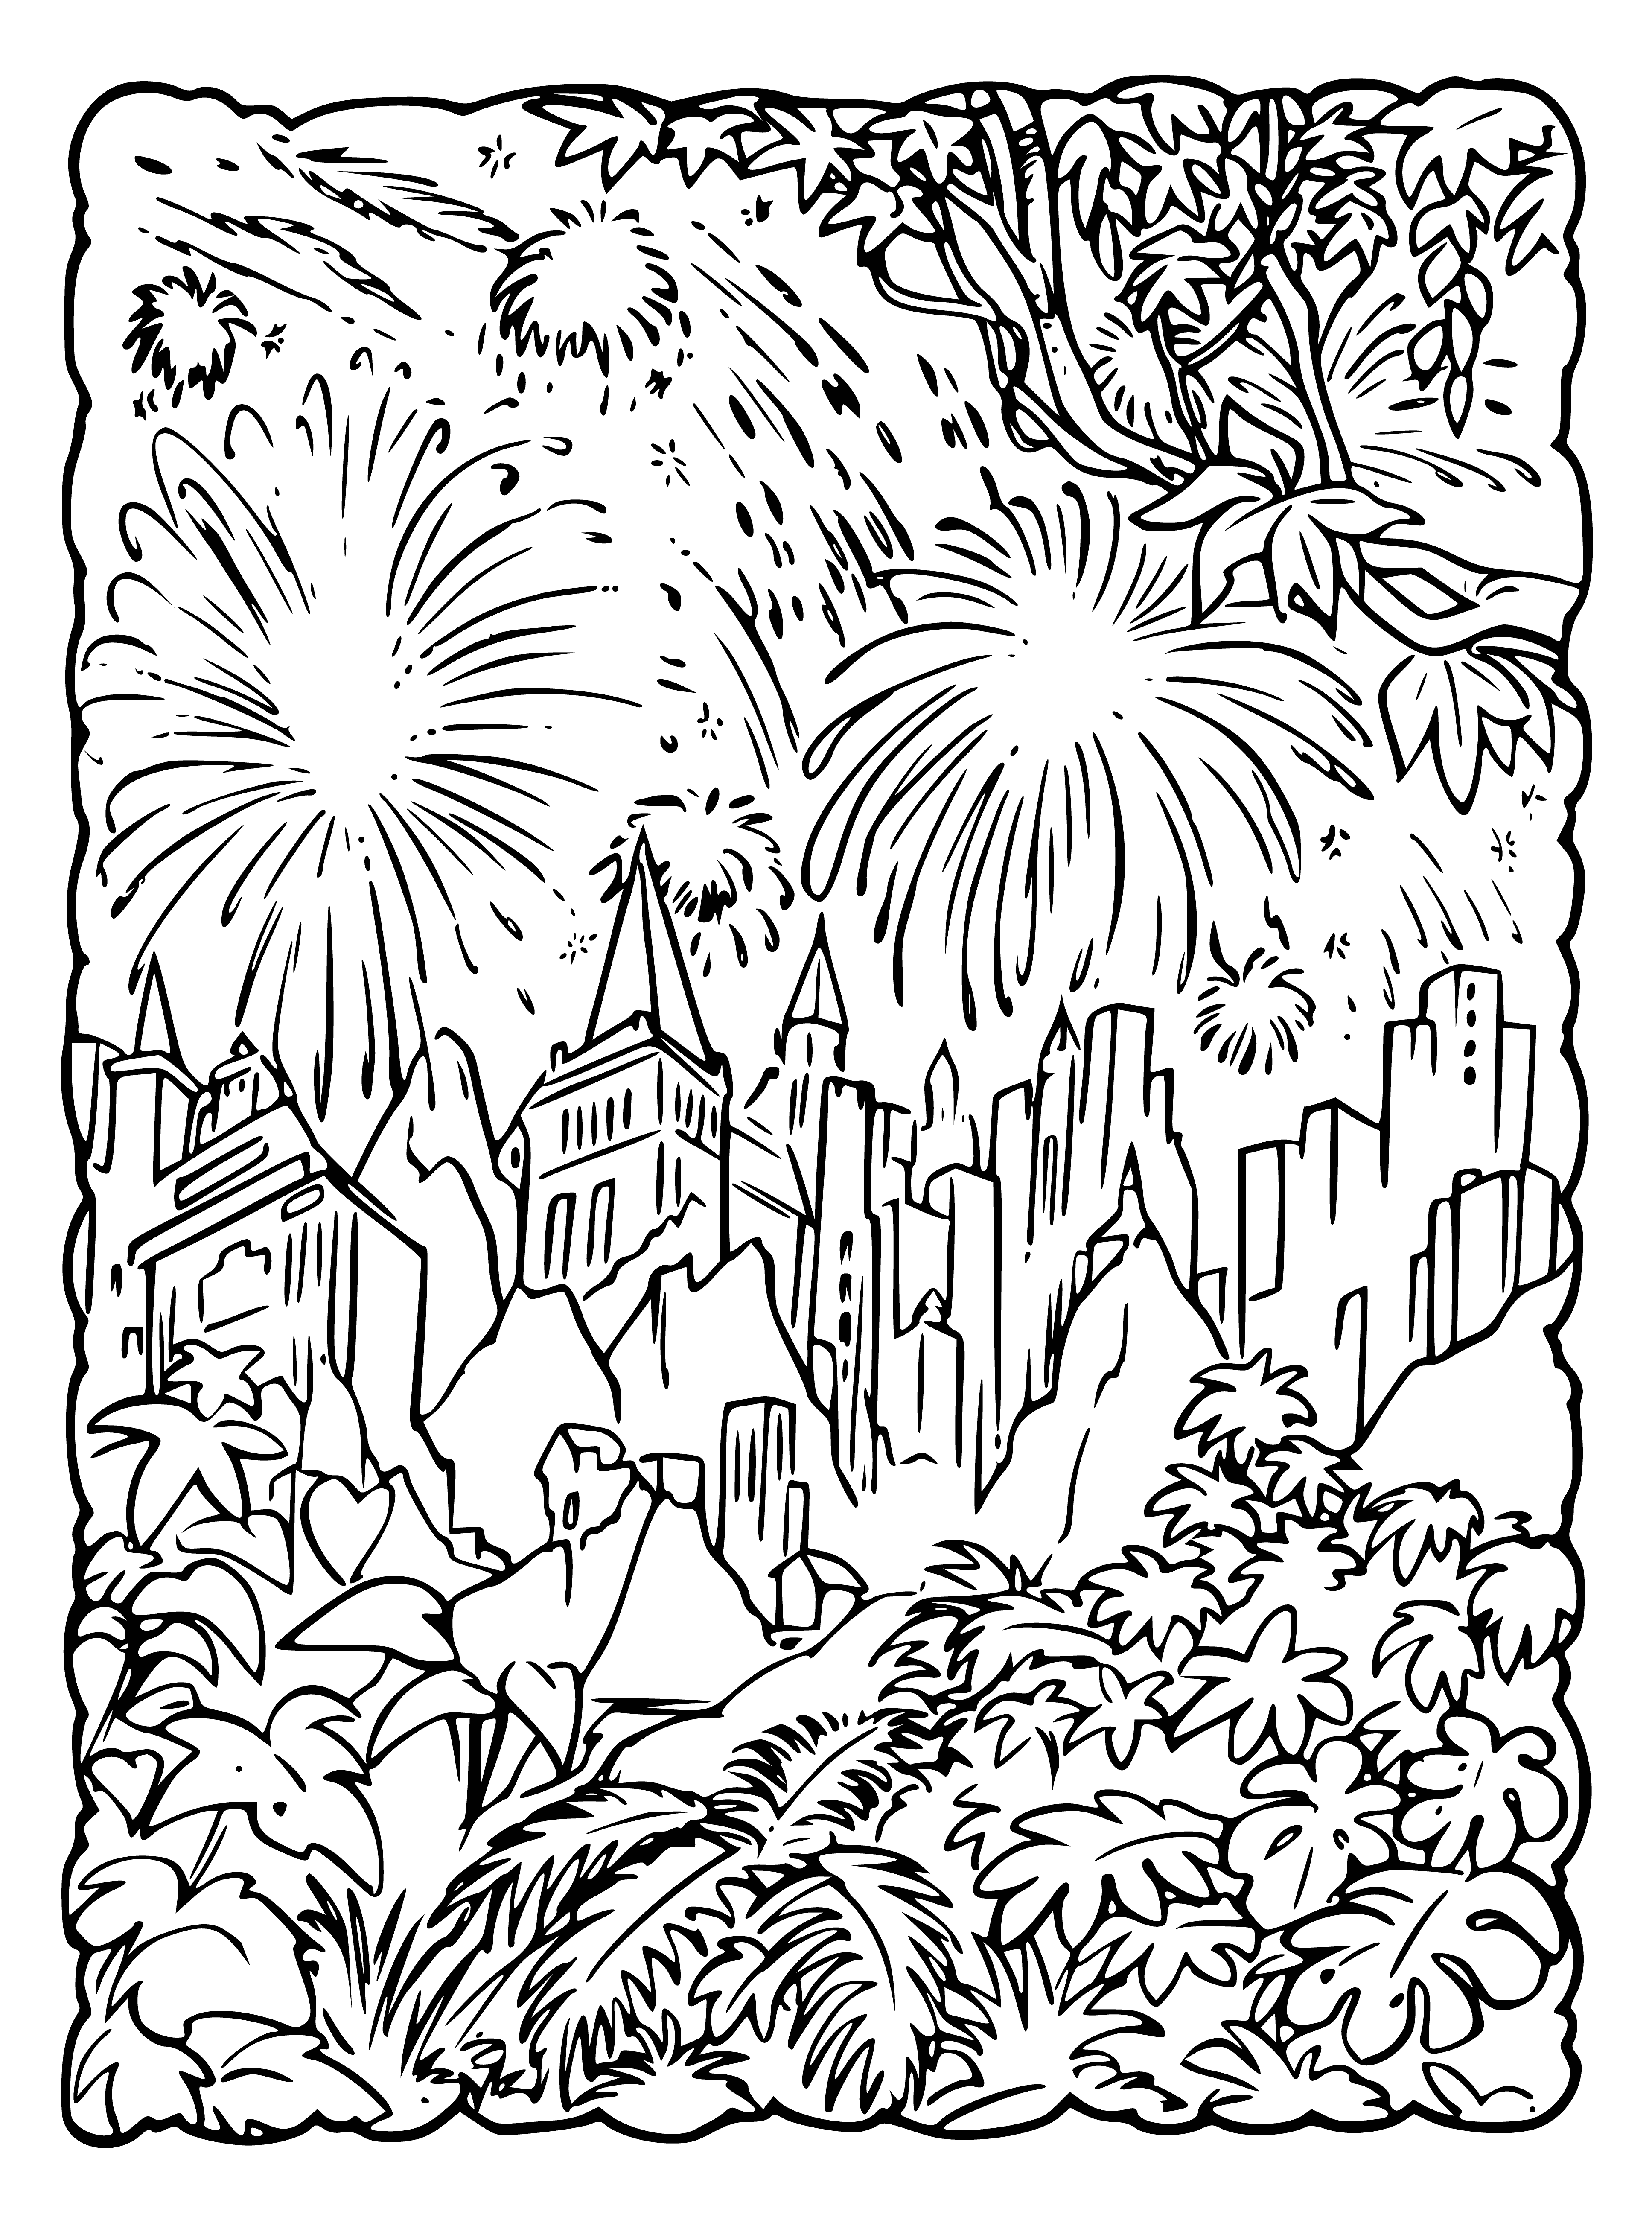 coloring page: Against a dark sky, glowing fireworks light up the cityscape river on a festive night of celebration; many gather to watch the show.